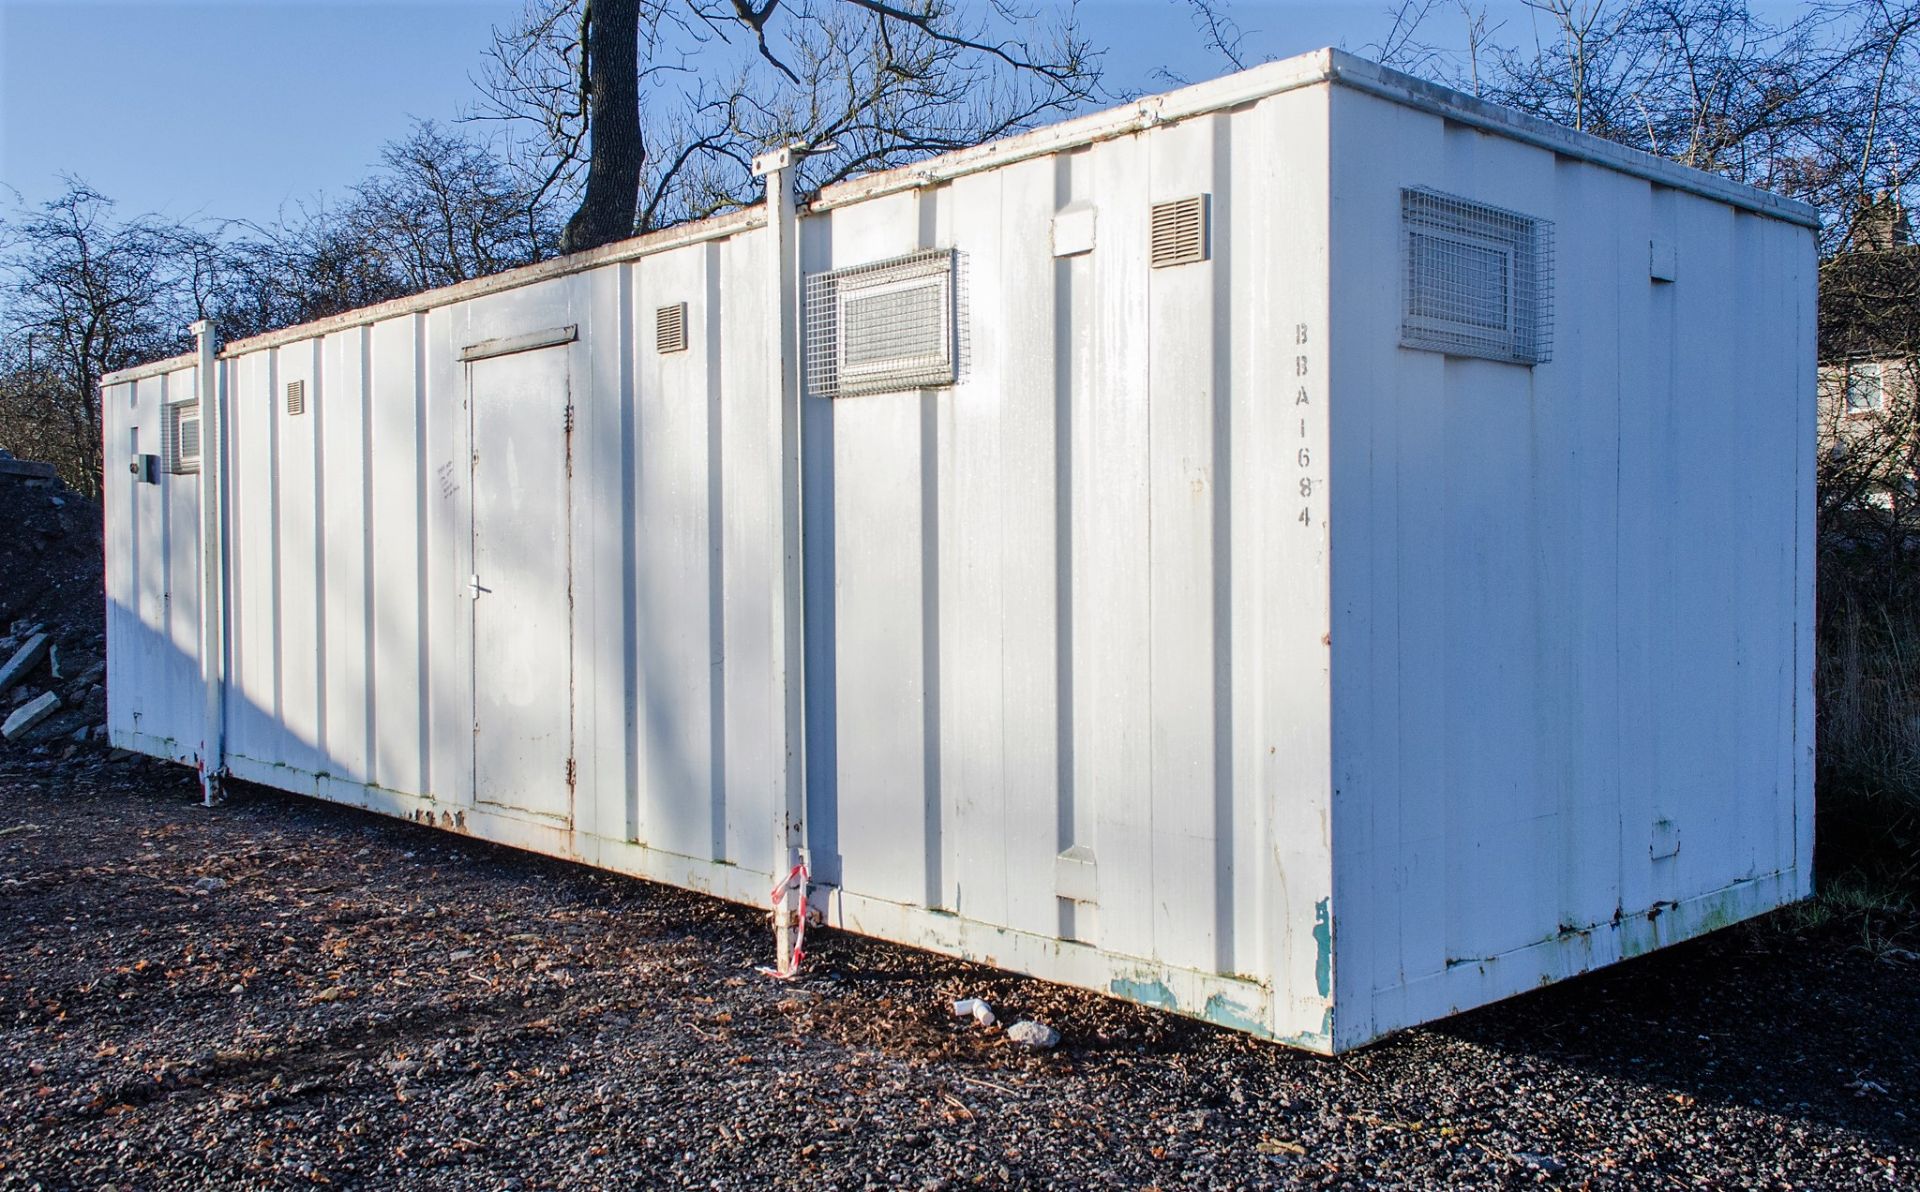 32ft x 9ft steel anti vandal shower site unit Comprising of 8 shower cubicles & changing area c/w - Image 2 of 8